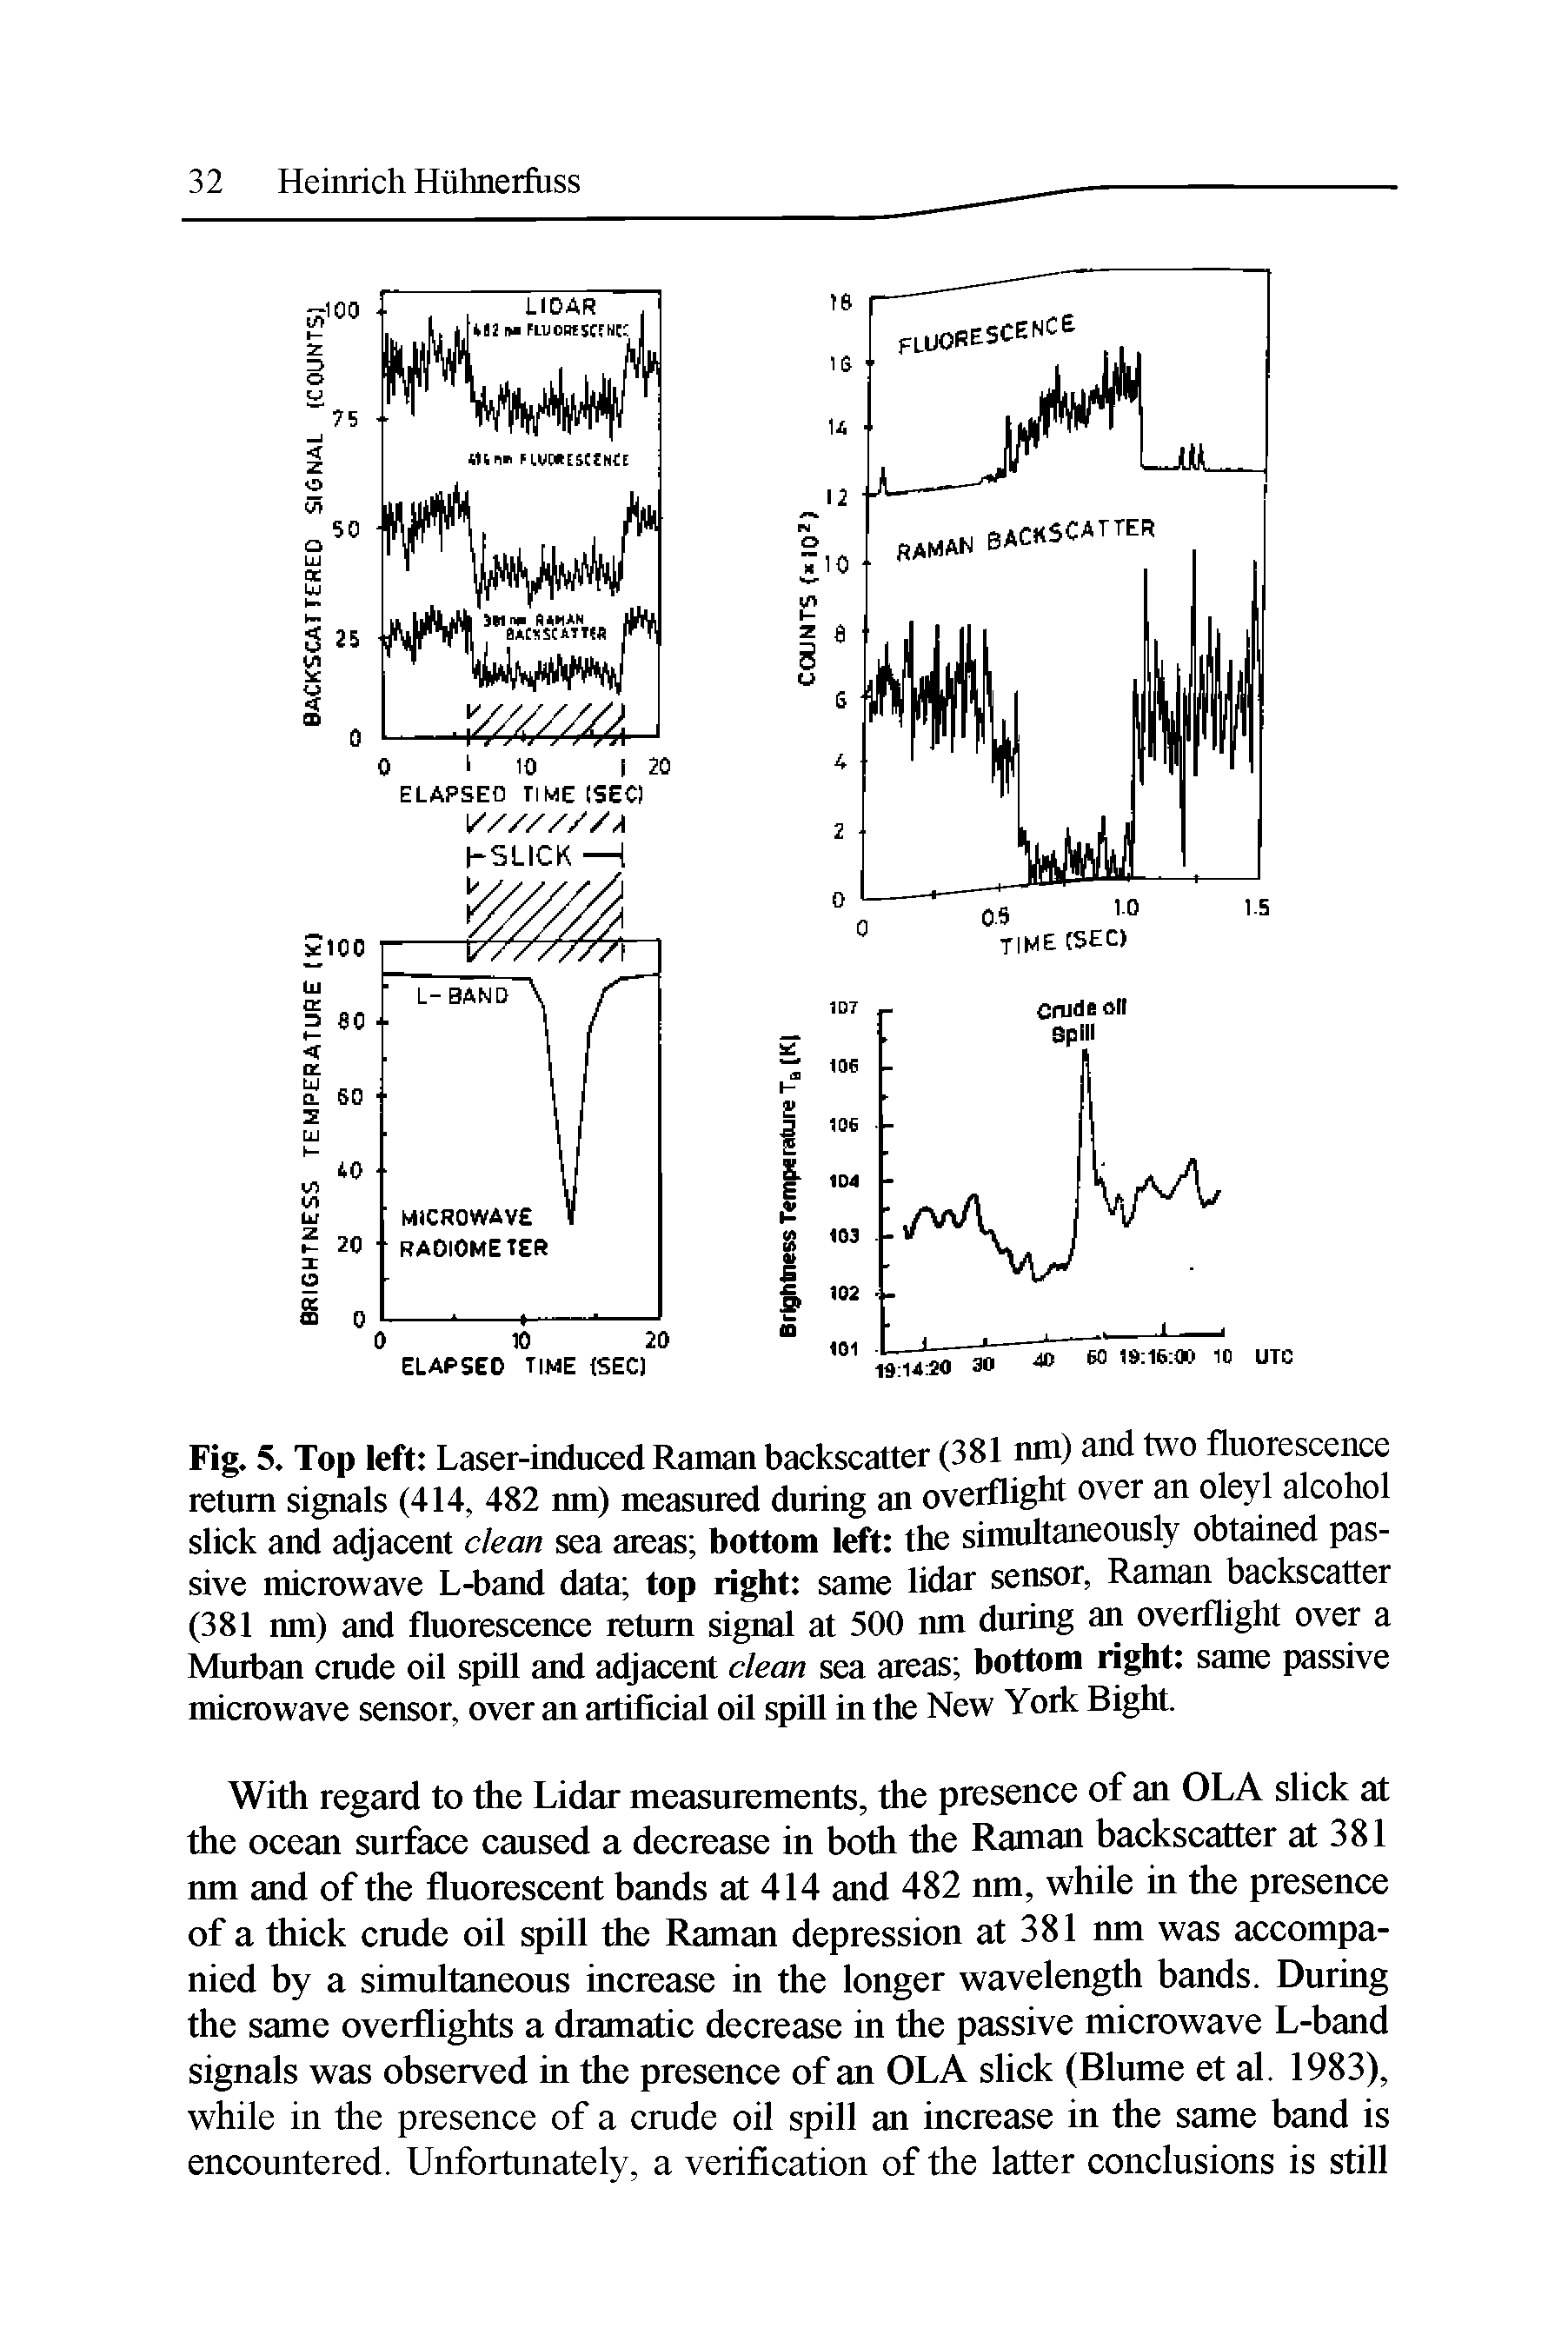 Fig. 5. Top left Laser-induced Raman backscatter (381 nm) and two fluorescence return signals (414, 482 nm) measured during an overflight over an oleyl alcohol slick and adjacent clean sea areas bottom left the simultaneously obtained passive microwave L-band data top right same lidar sensor, Raman backscatter (381 nm) and fluorescence return signal at 500 nm during an overflight over a Murban cmde oil spill and adjacent clean sea areas bottom right same passive microwave sensor, over an artificial oil spill in the New York Bight.